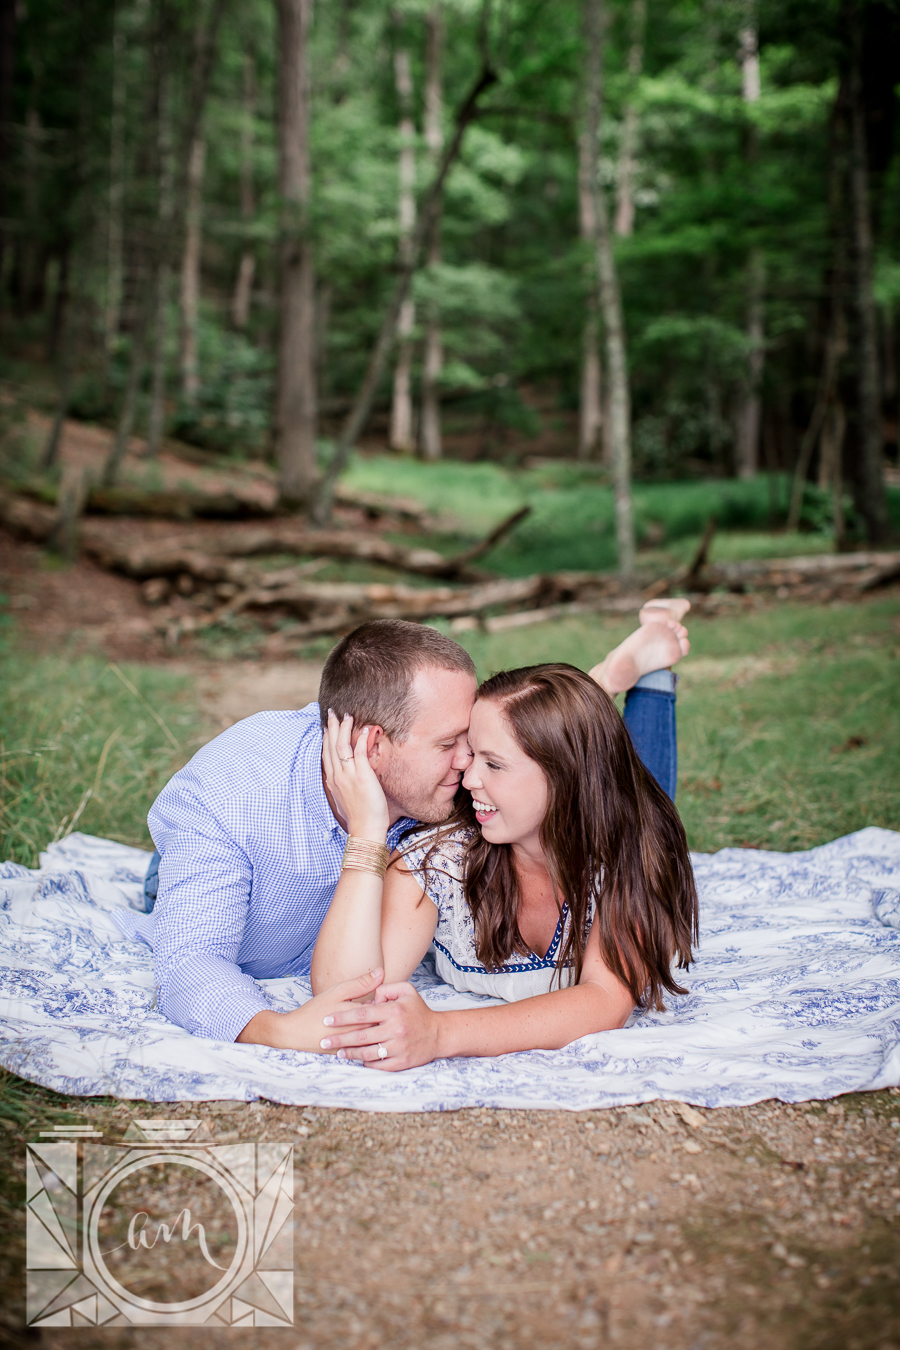 Laying on their stomachs engagement photo by Knoxville Wedding Photographer, Amanda May Photos.